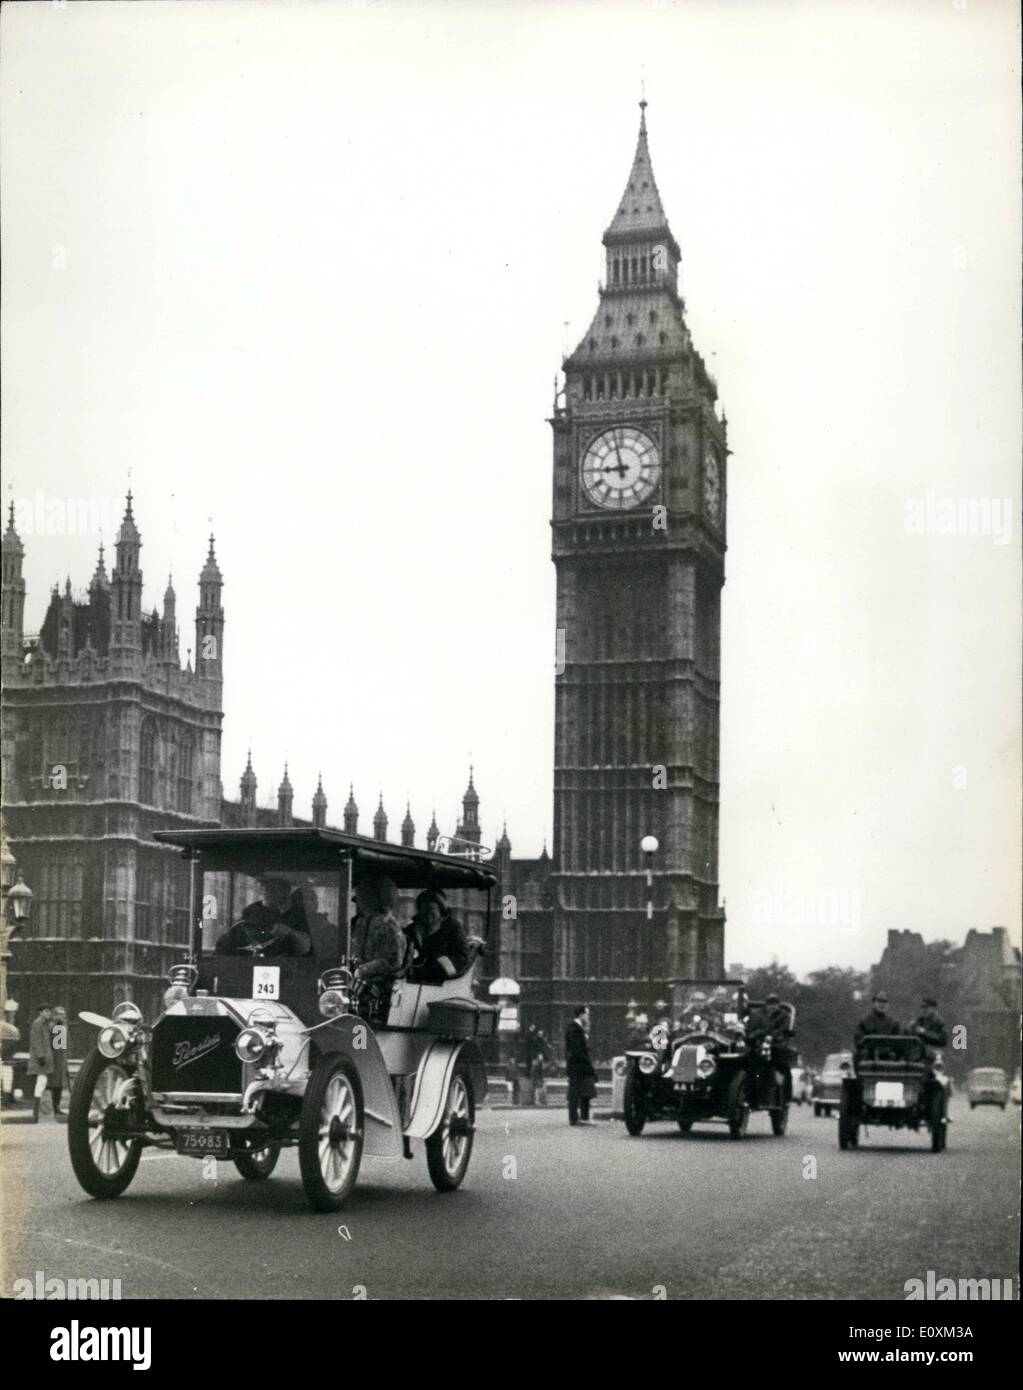 May 05, 1967 - Veteran Cars take Part in Commemoration run from Hyde Park to Brighton.: A record 283 Veteran cars built before 1905 were entered for the Royal Automobile Club's London to Brighton run which started from Hyde Park early this morning, Photo shows This veteran 1904 Peerless, entered by B. Upjohn is seen leading other veteran cars over Westminster Bridge this morning on their run to Brighton. Stock Photo